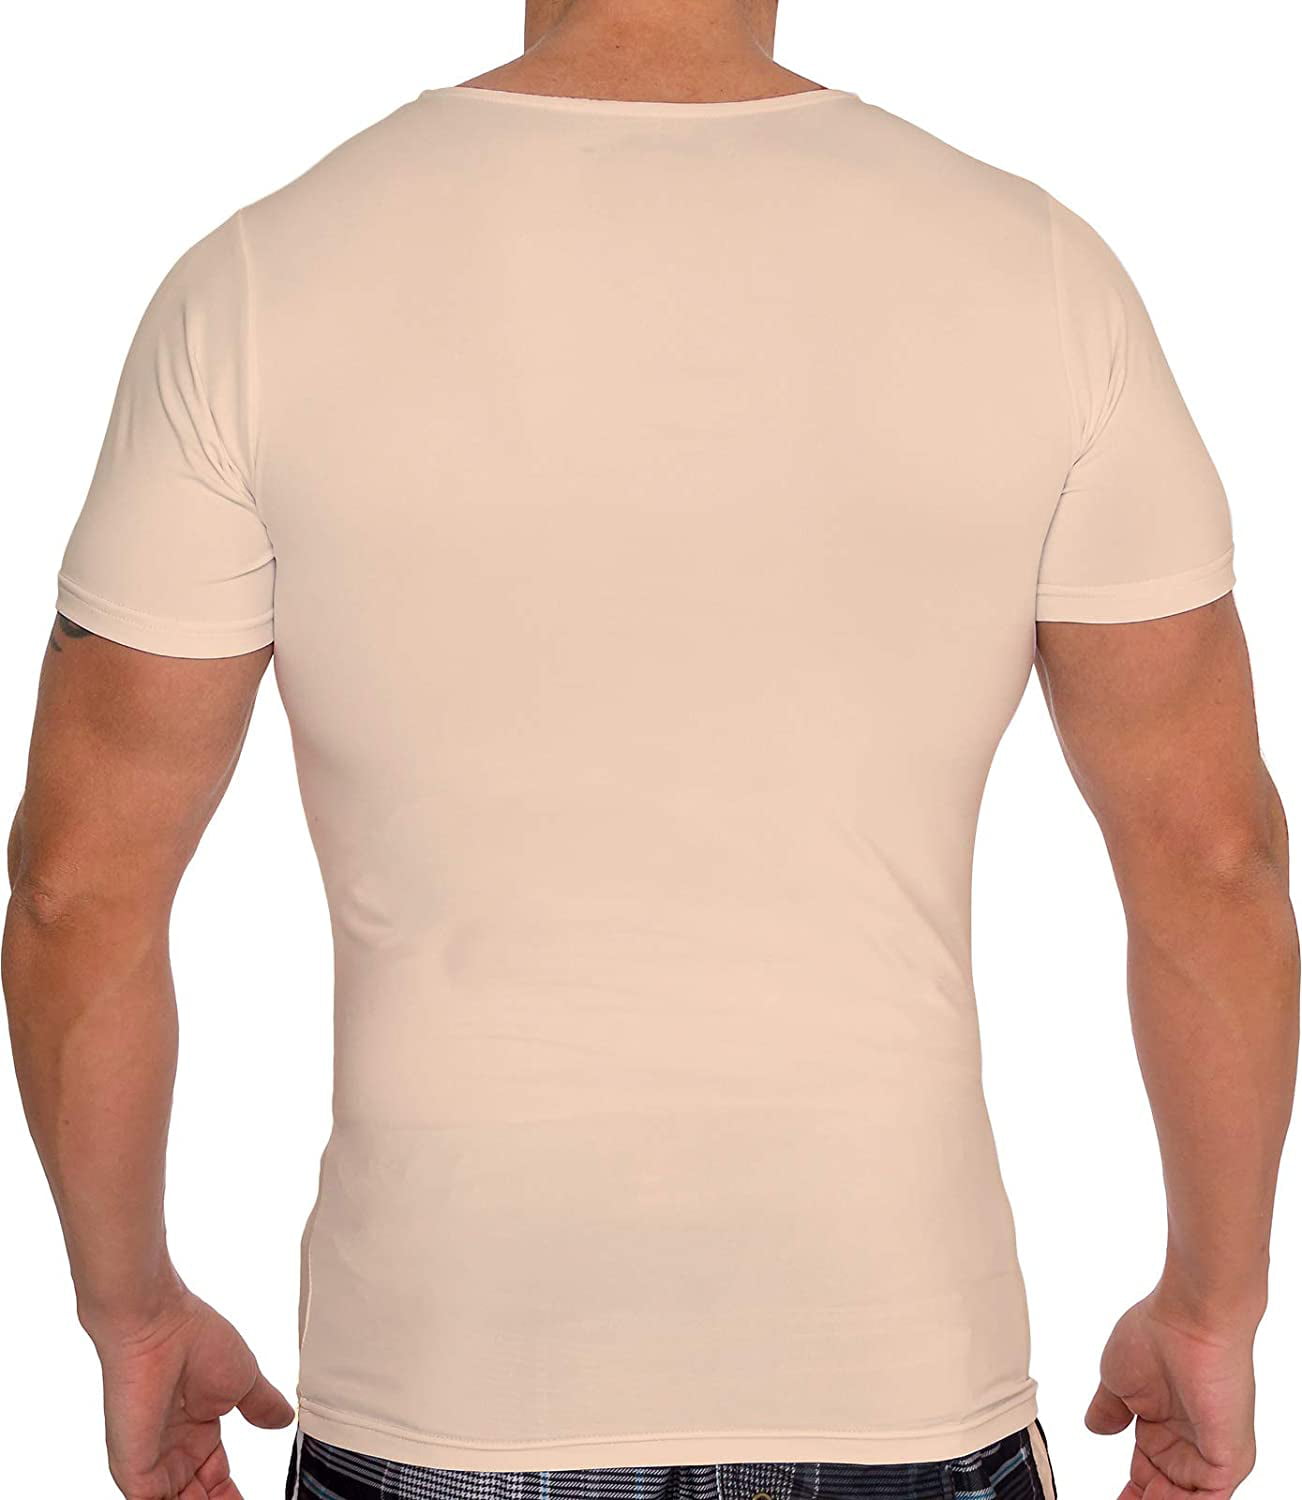 Short Sleeve Body Shaper T-Shirt for Weight Loss LISH Mens Slimming Light Compression Crew Neck Shirt 